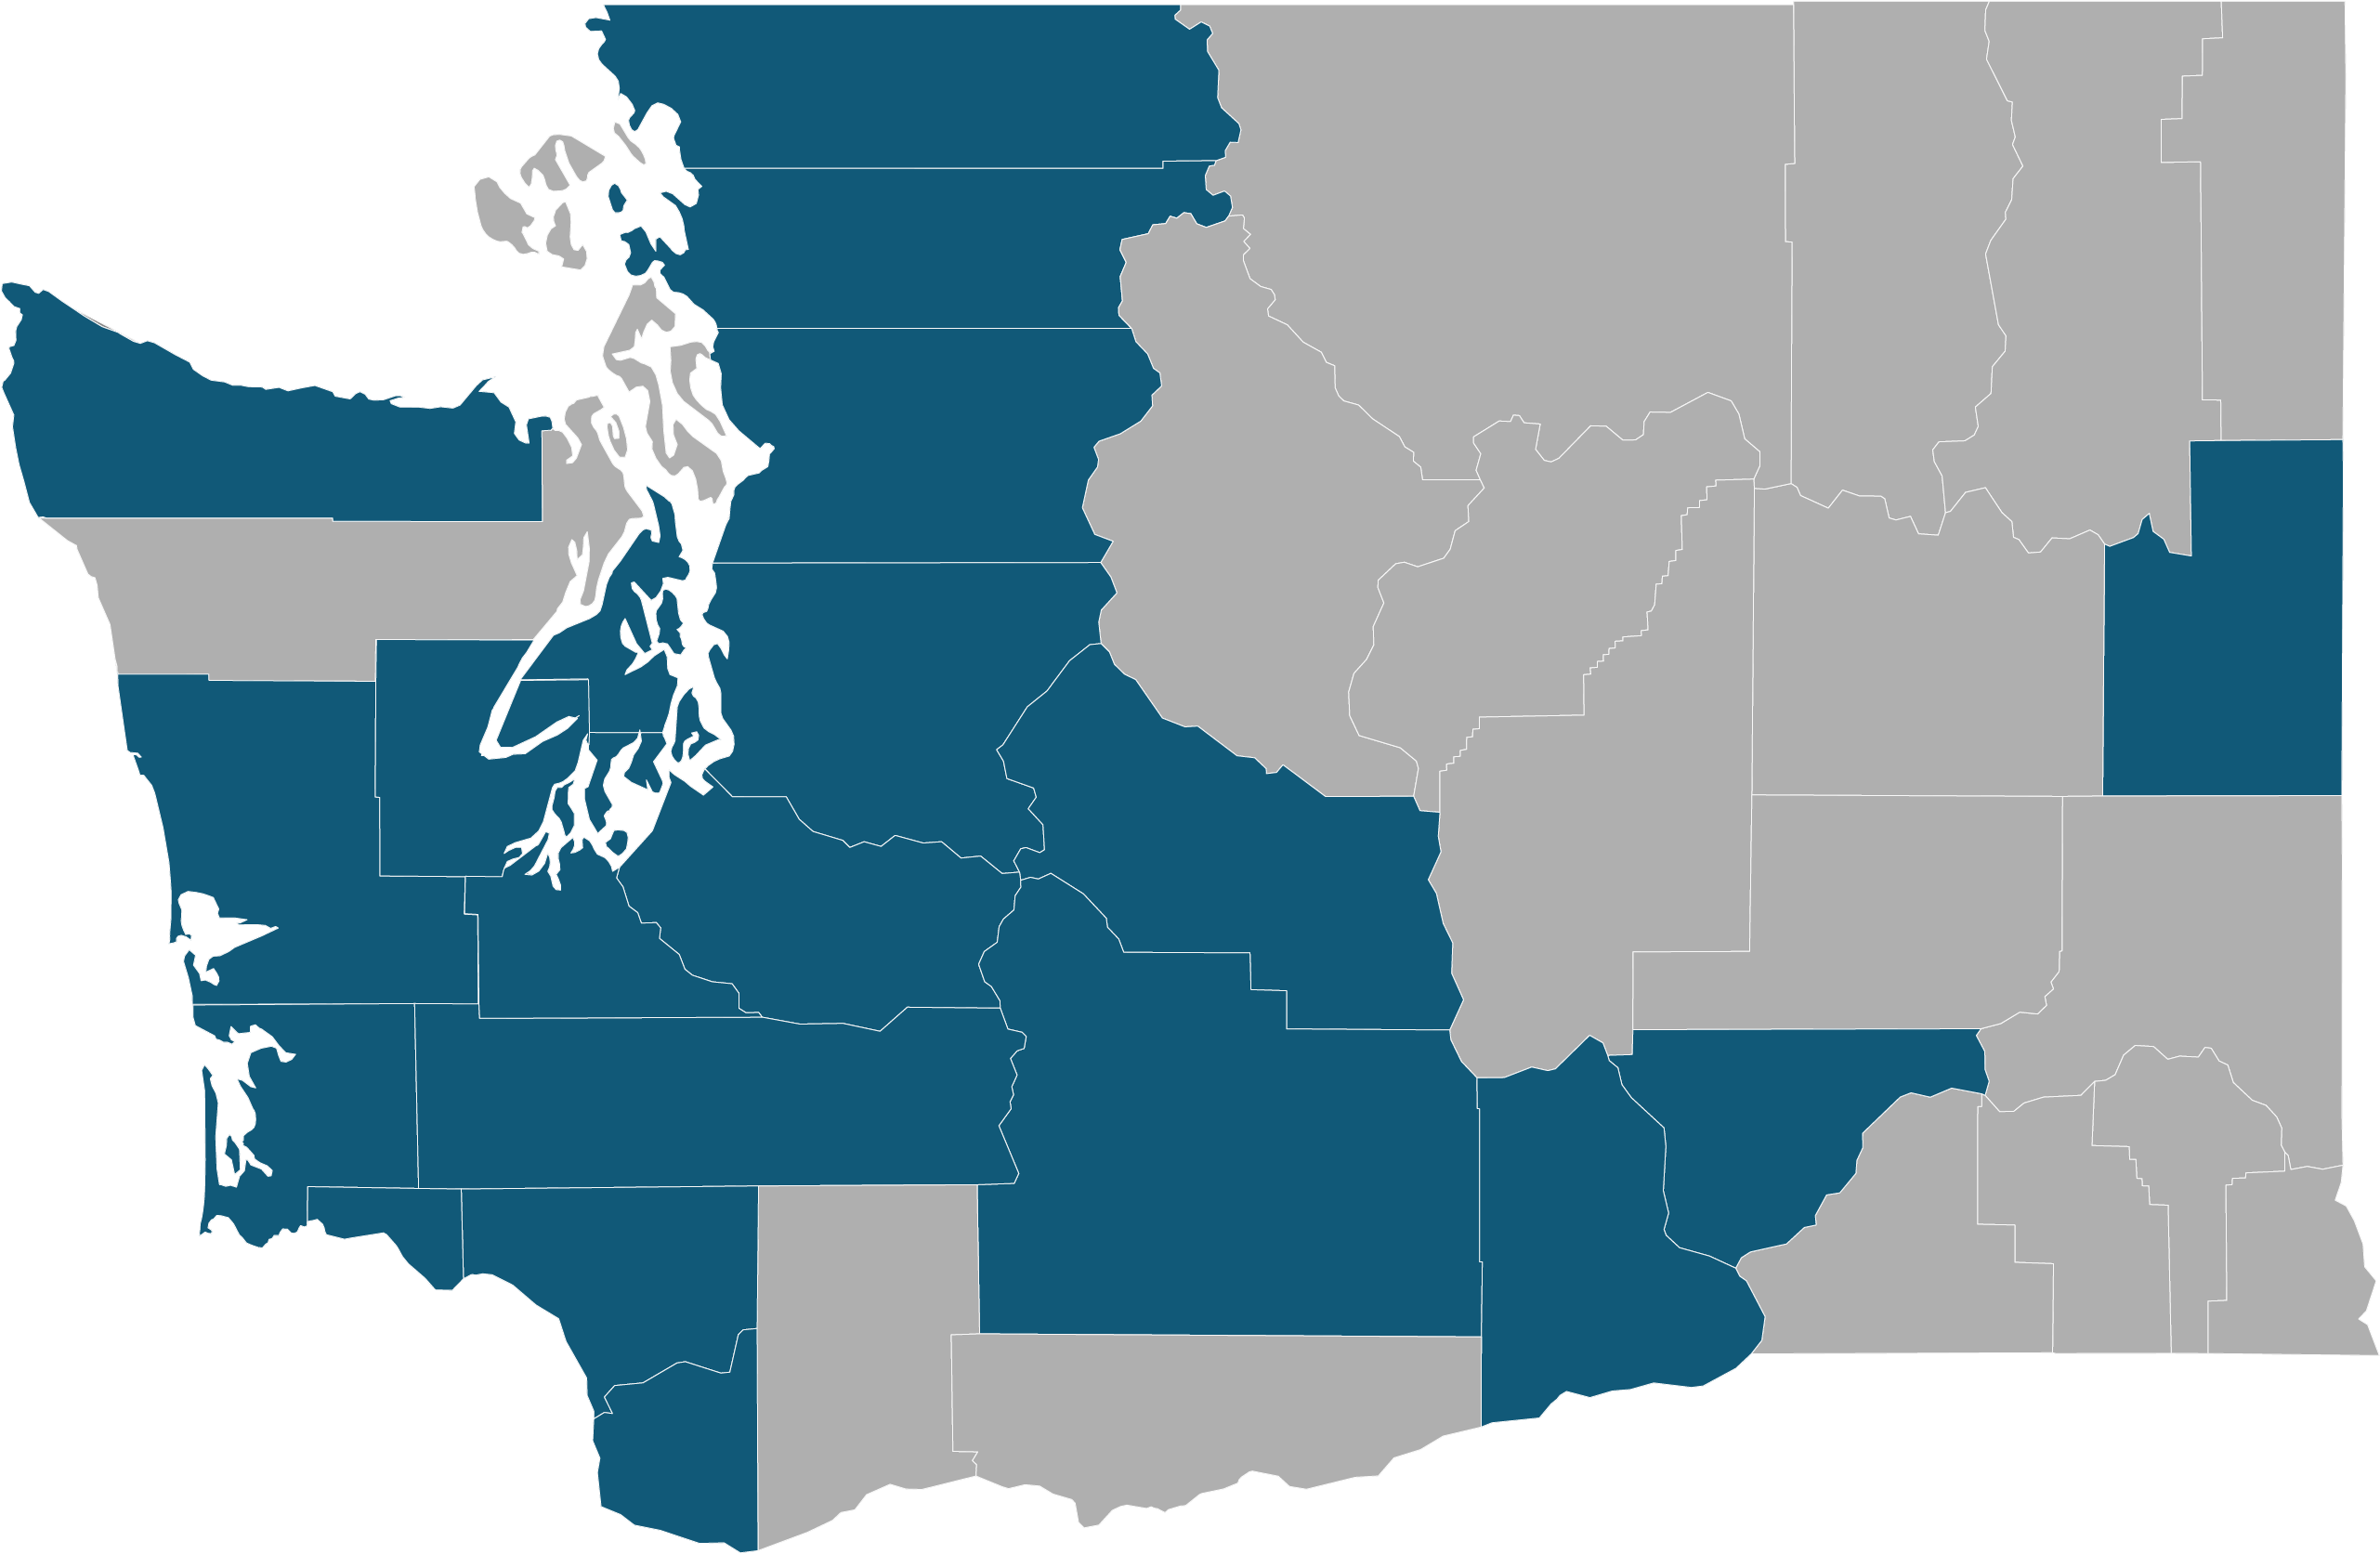 Washington state map with 20 counties colored in blue to represent Cancer Prevention and Control efforts.